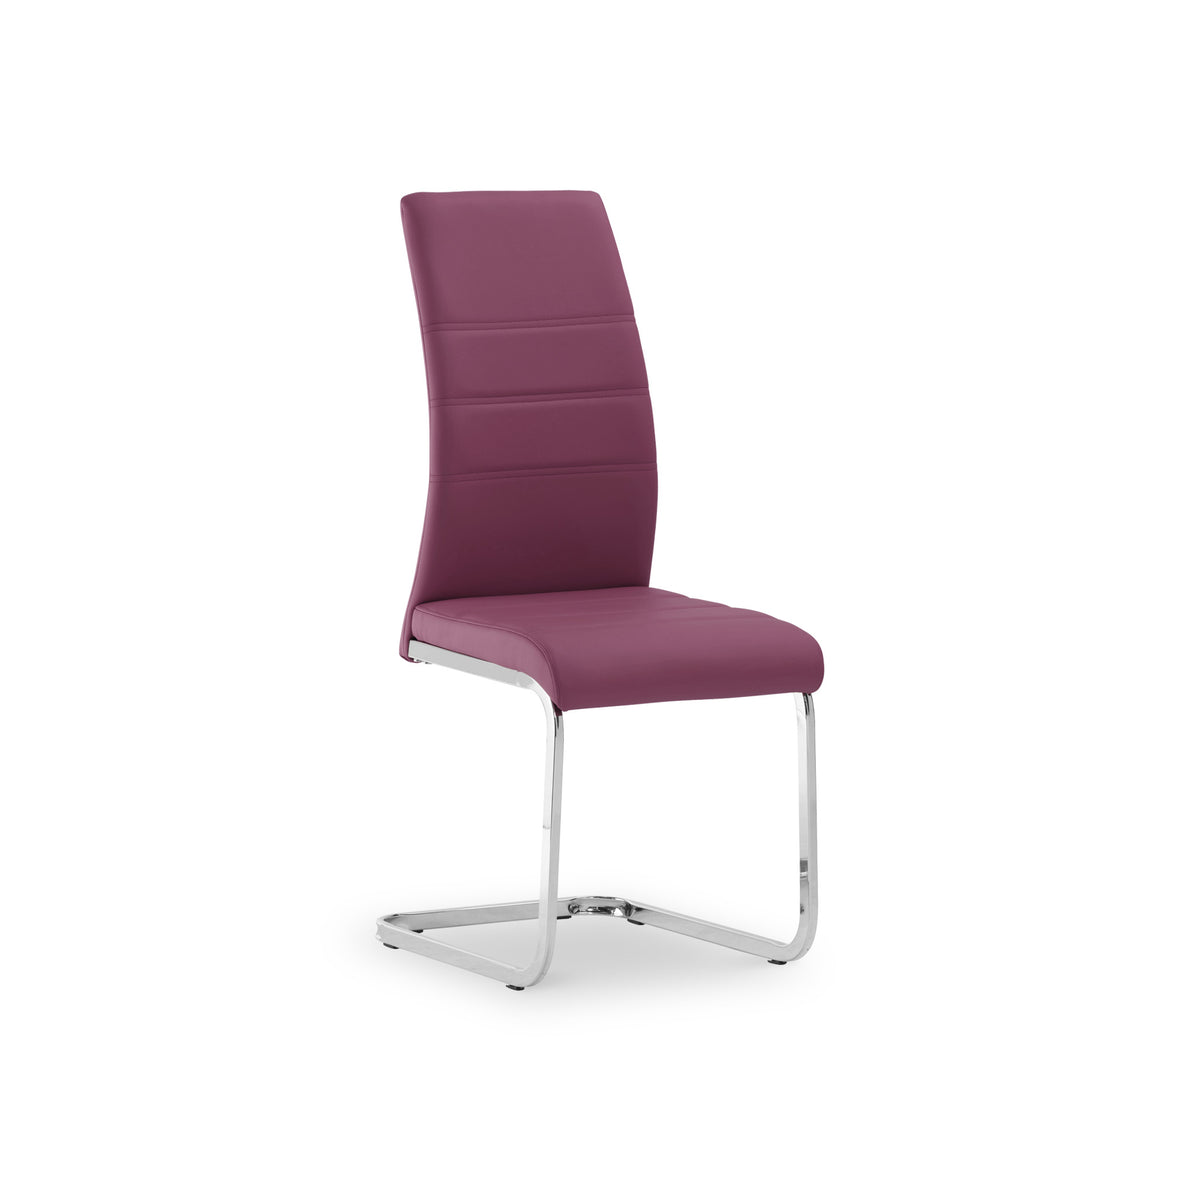 Jackson Purple Faux Leather Dining Chair from Roseland Furniture